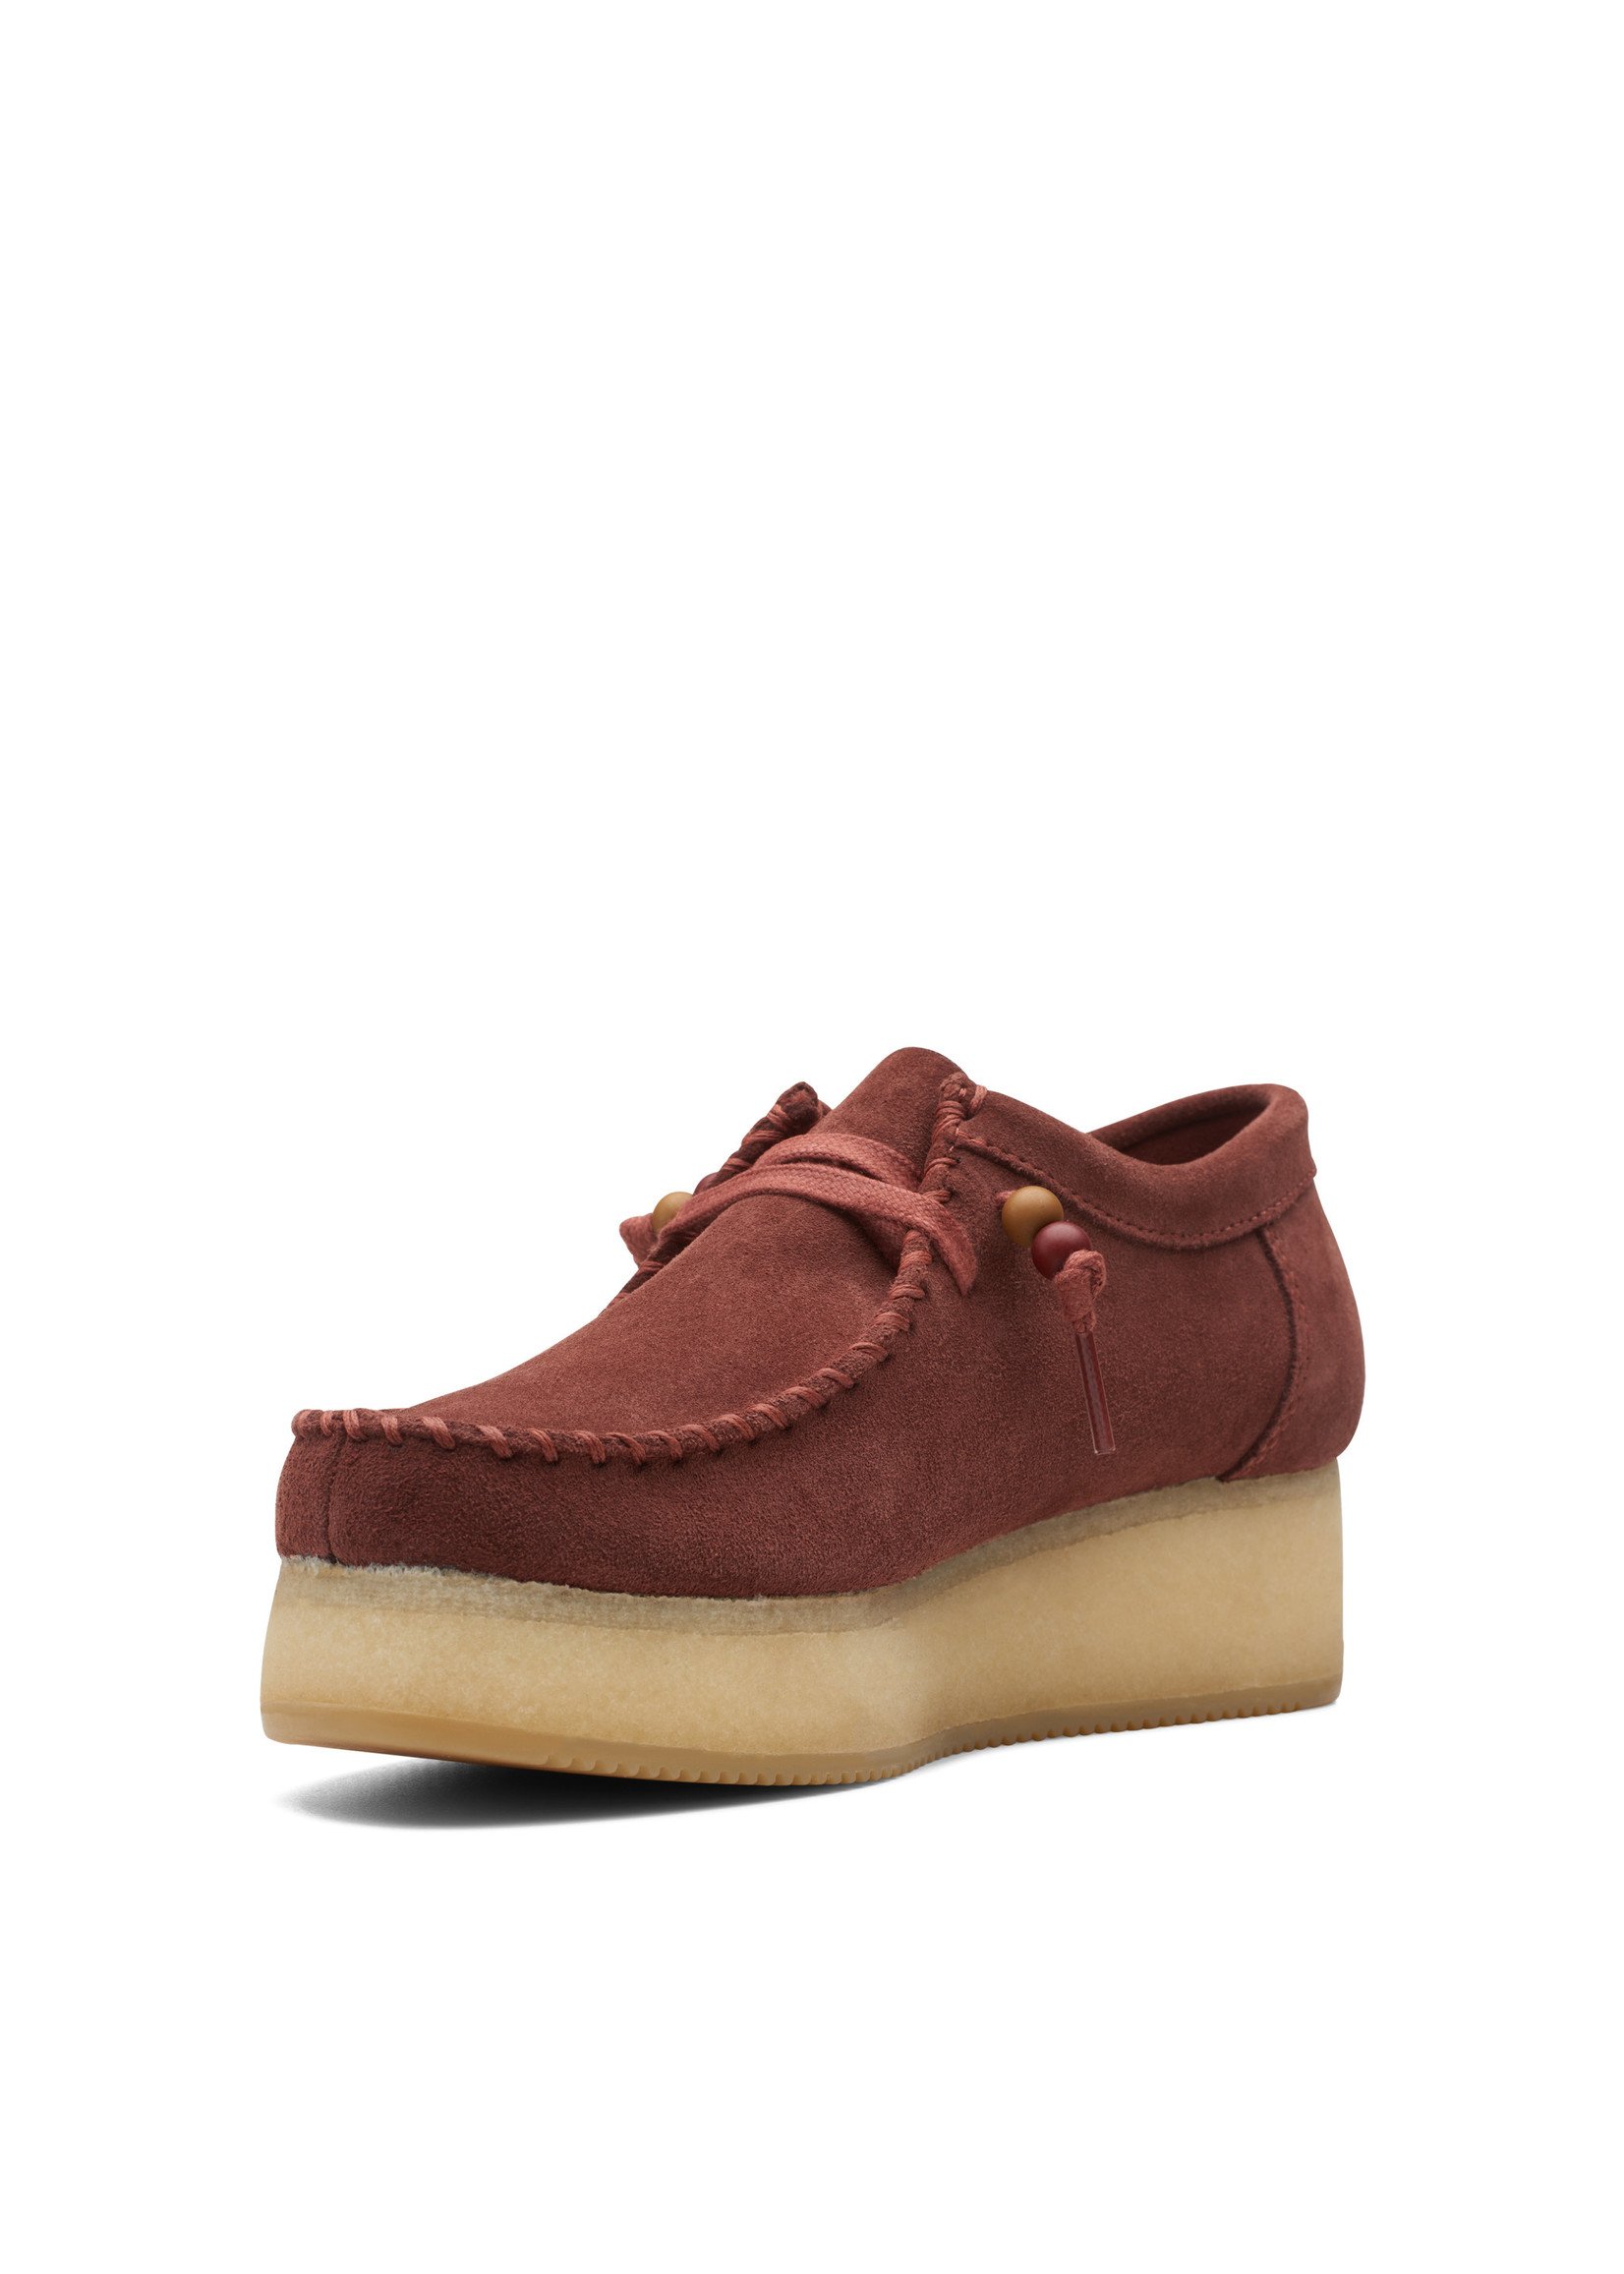 Clarks Womens Wallacraft Lo Burgundy Suede Red | 26168747 - SHOE PLUS